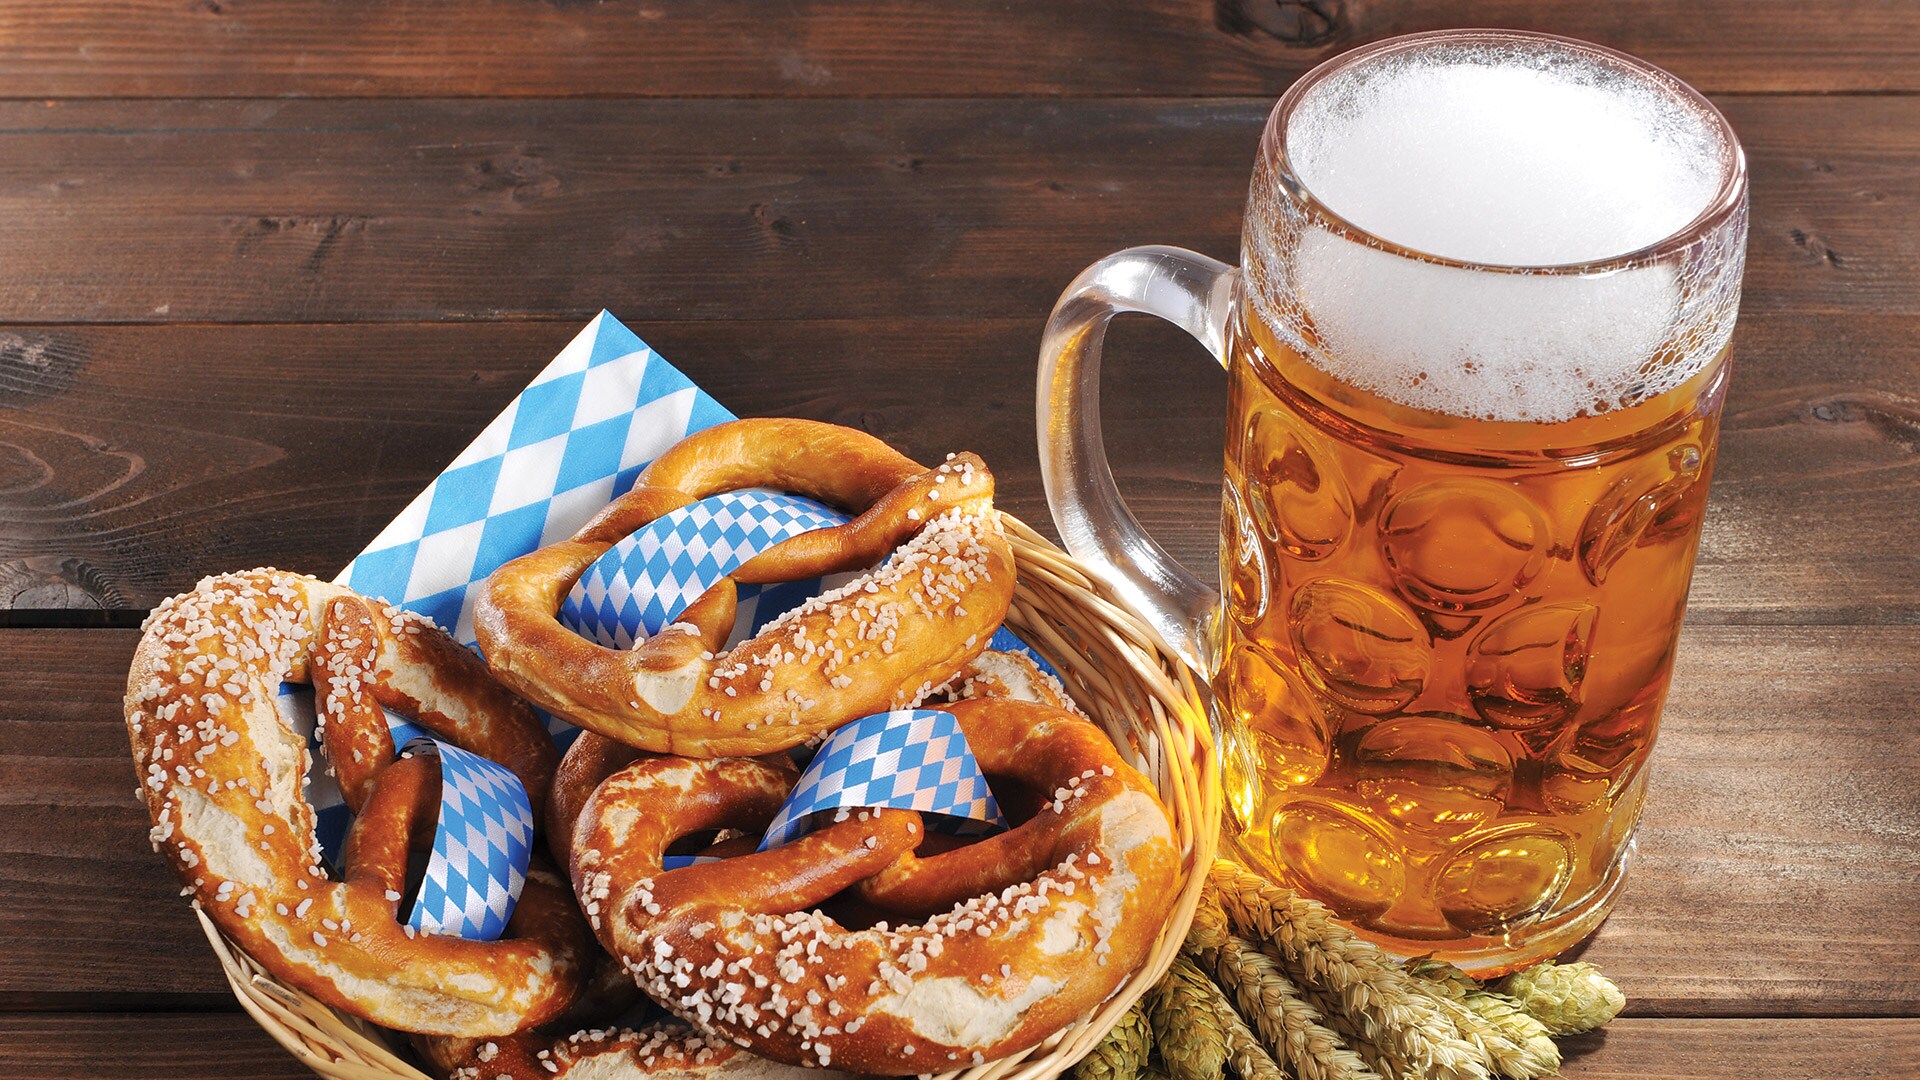 Stein glass of beer and a plate of pretsels, Germany